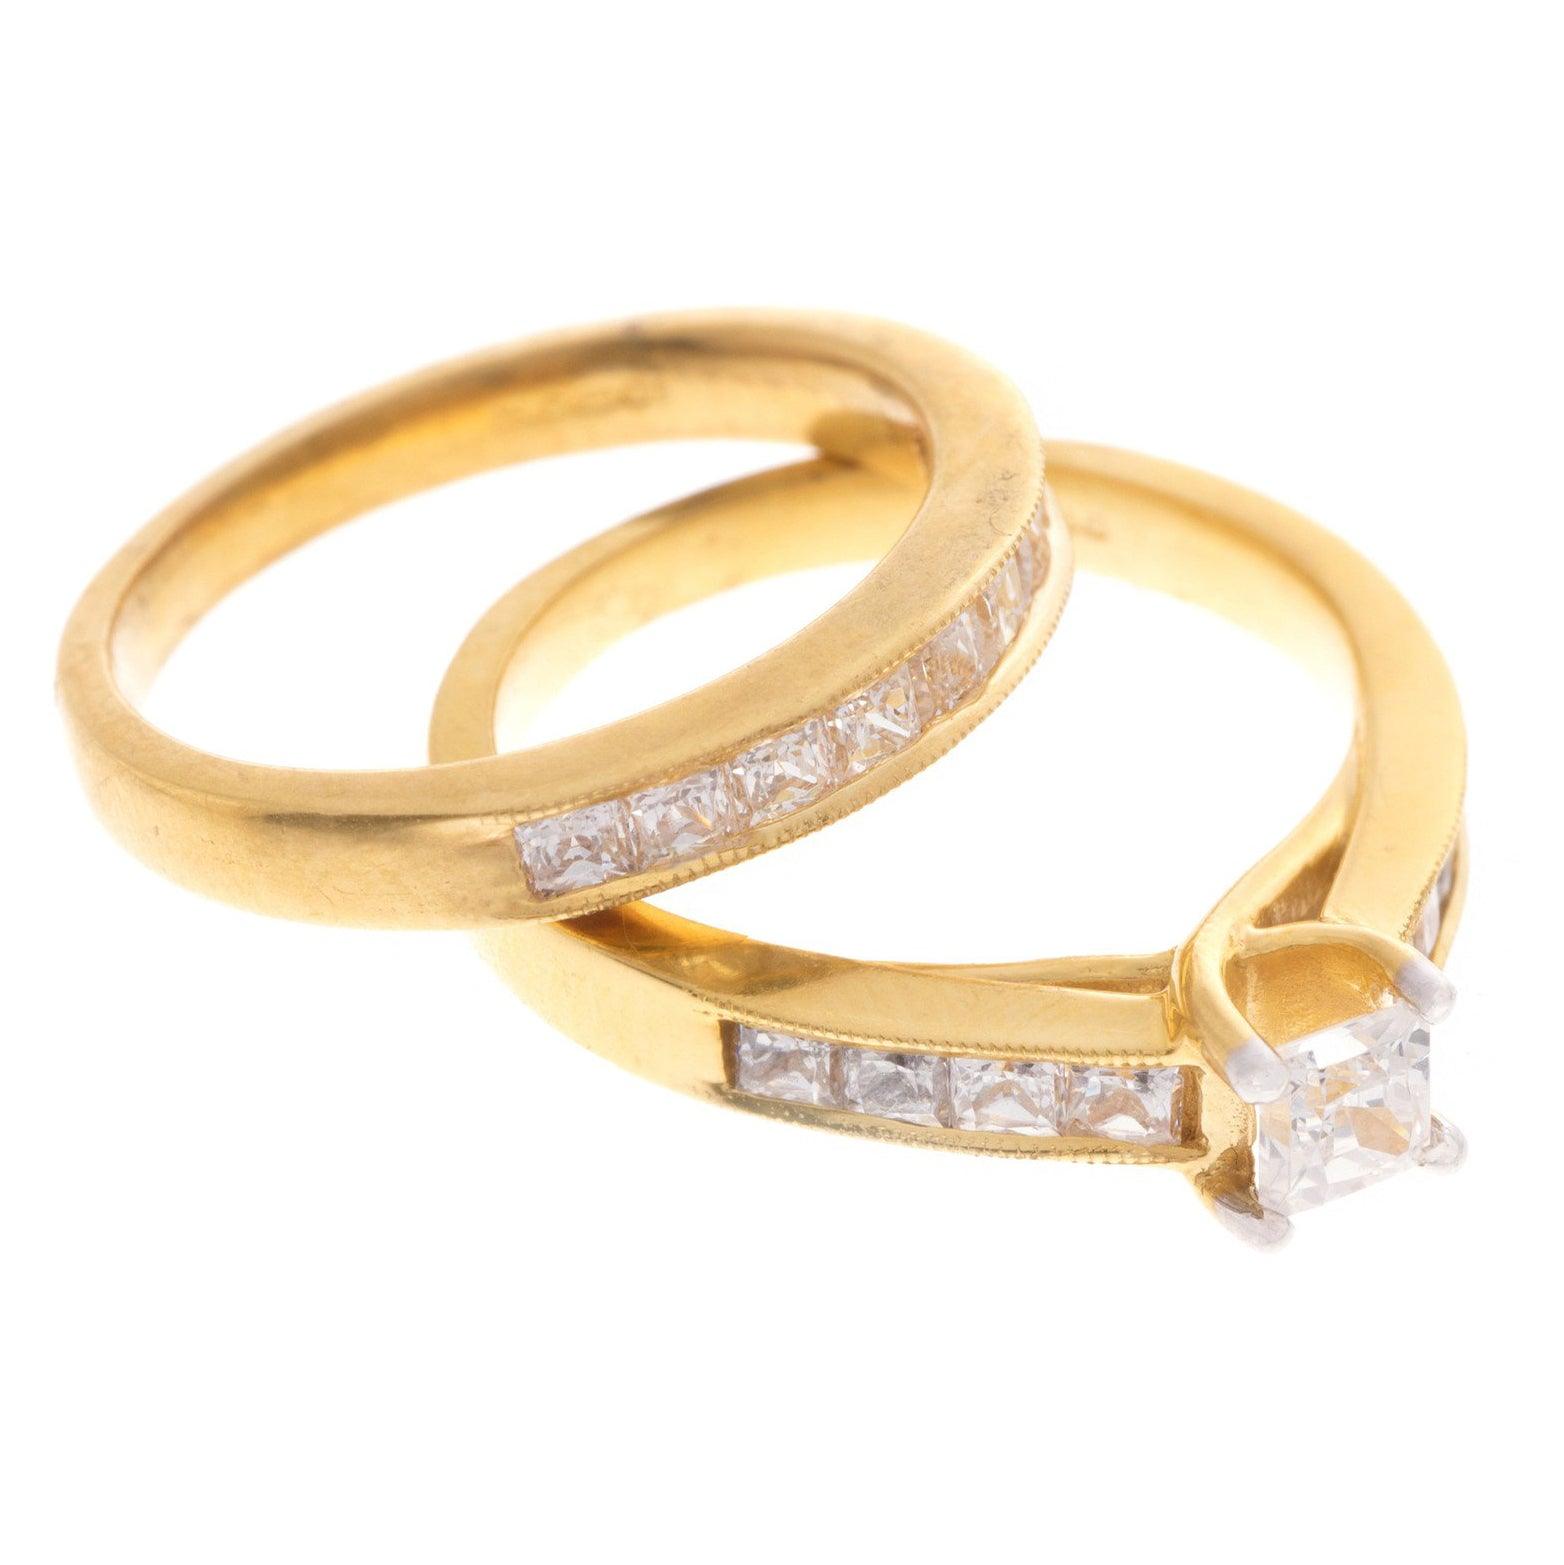 22ct Gold Cubic Zirconia Engagement Ring and Wedding Band Suite LR1200 - Minar Jewellers